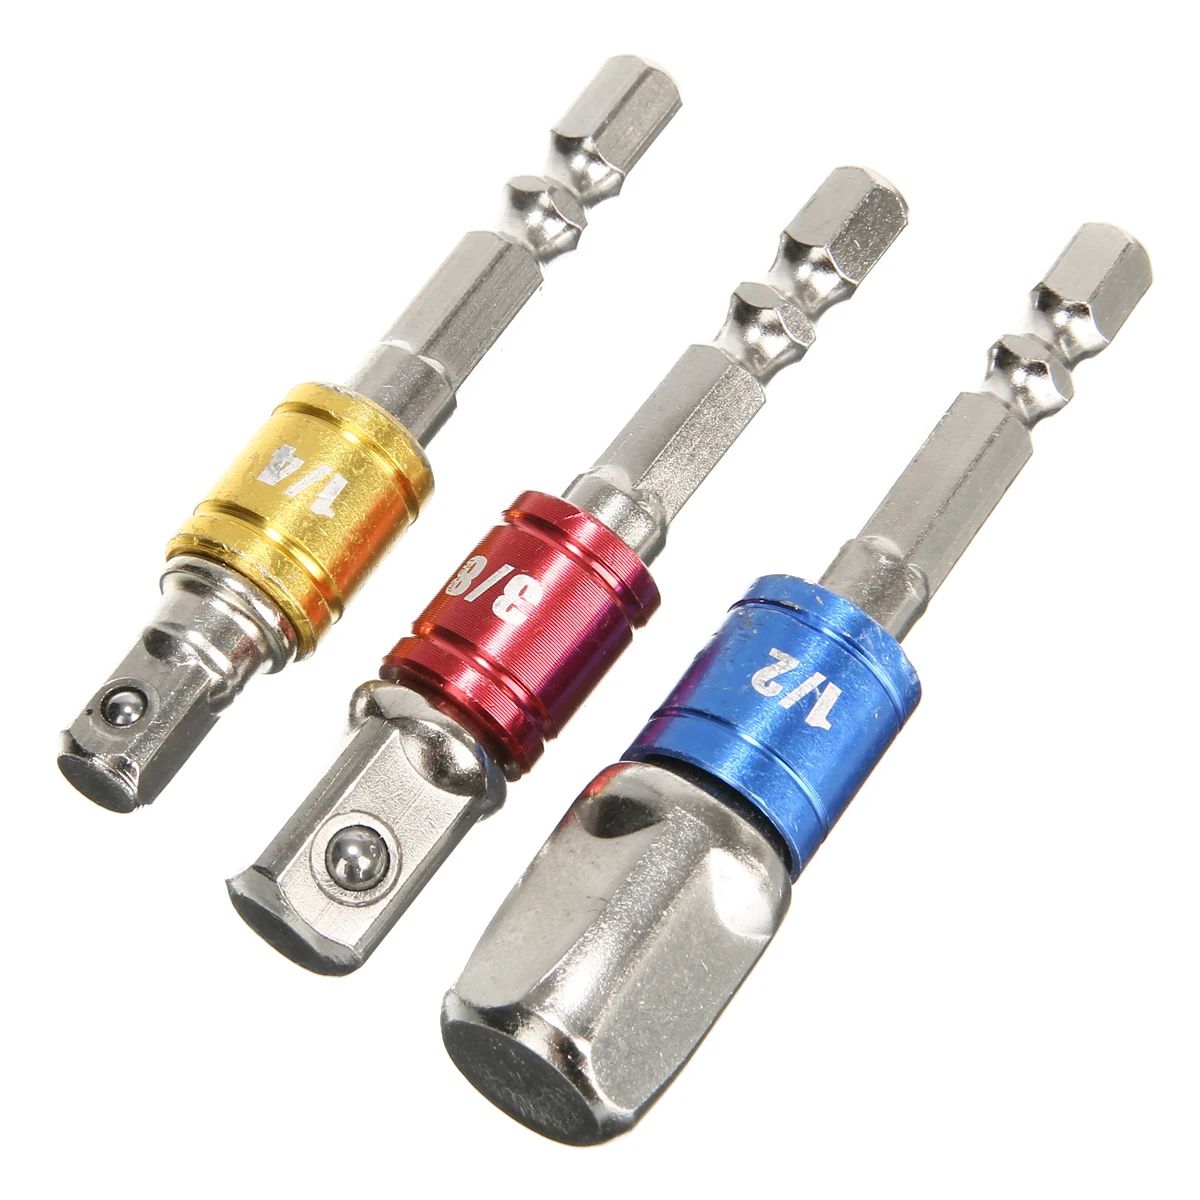 New 3pcs Drill Socket Adapter for Impact Driver Hex Shank to Square Socket Drill Bits Bar Extension Set 1/4